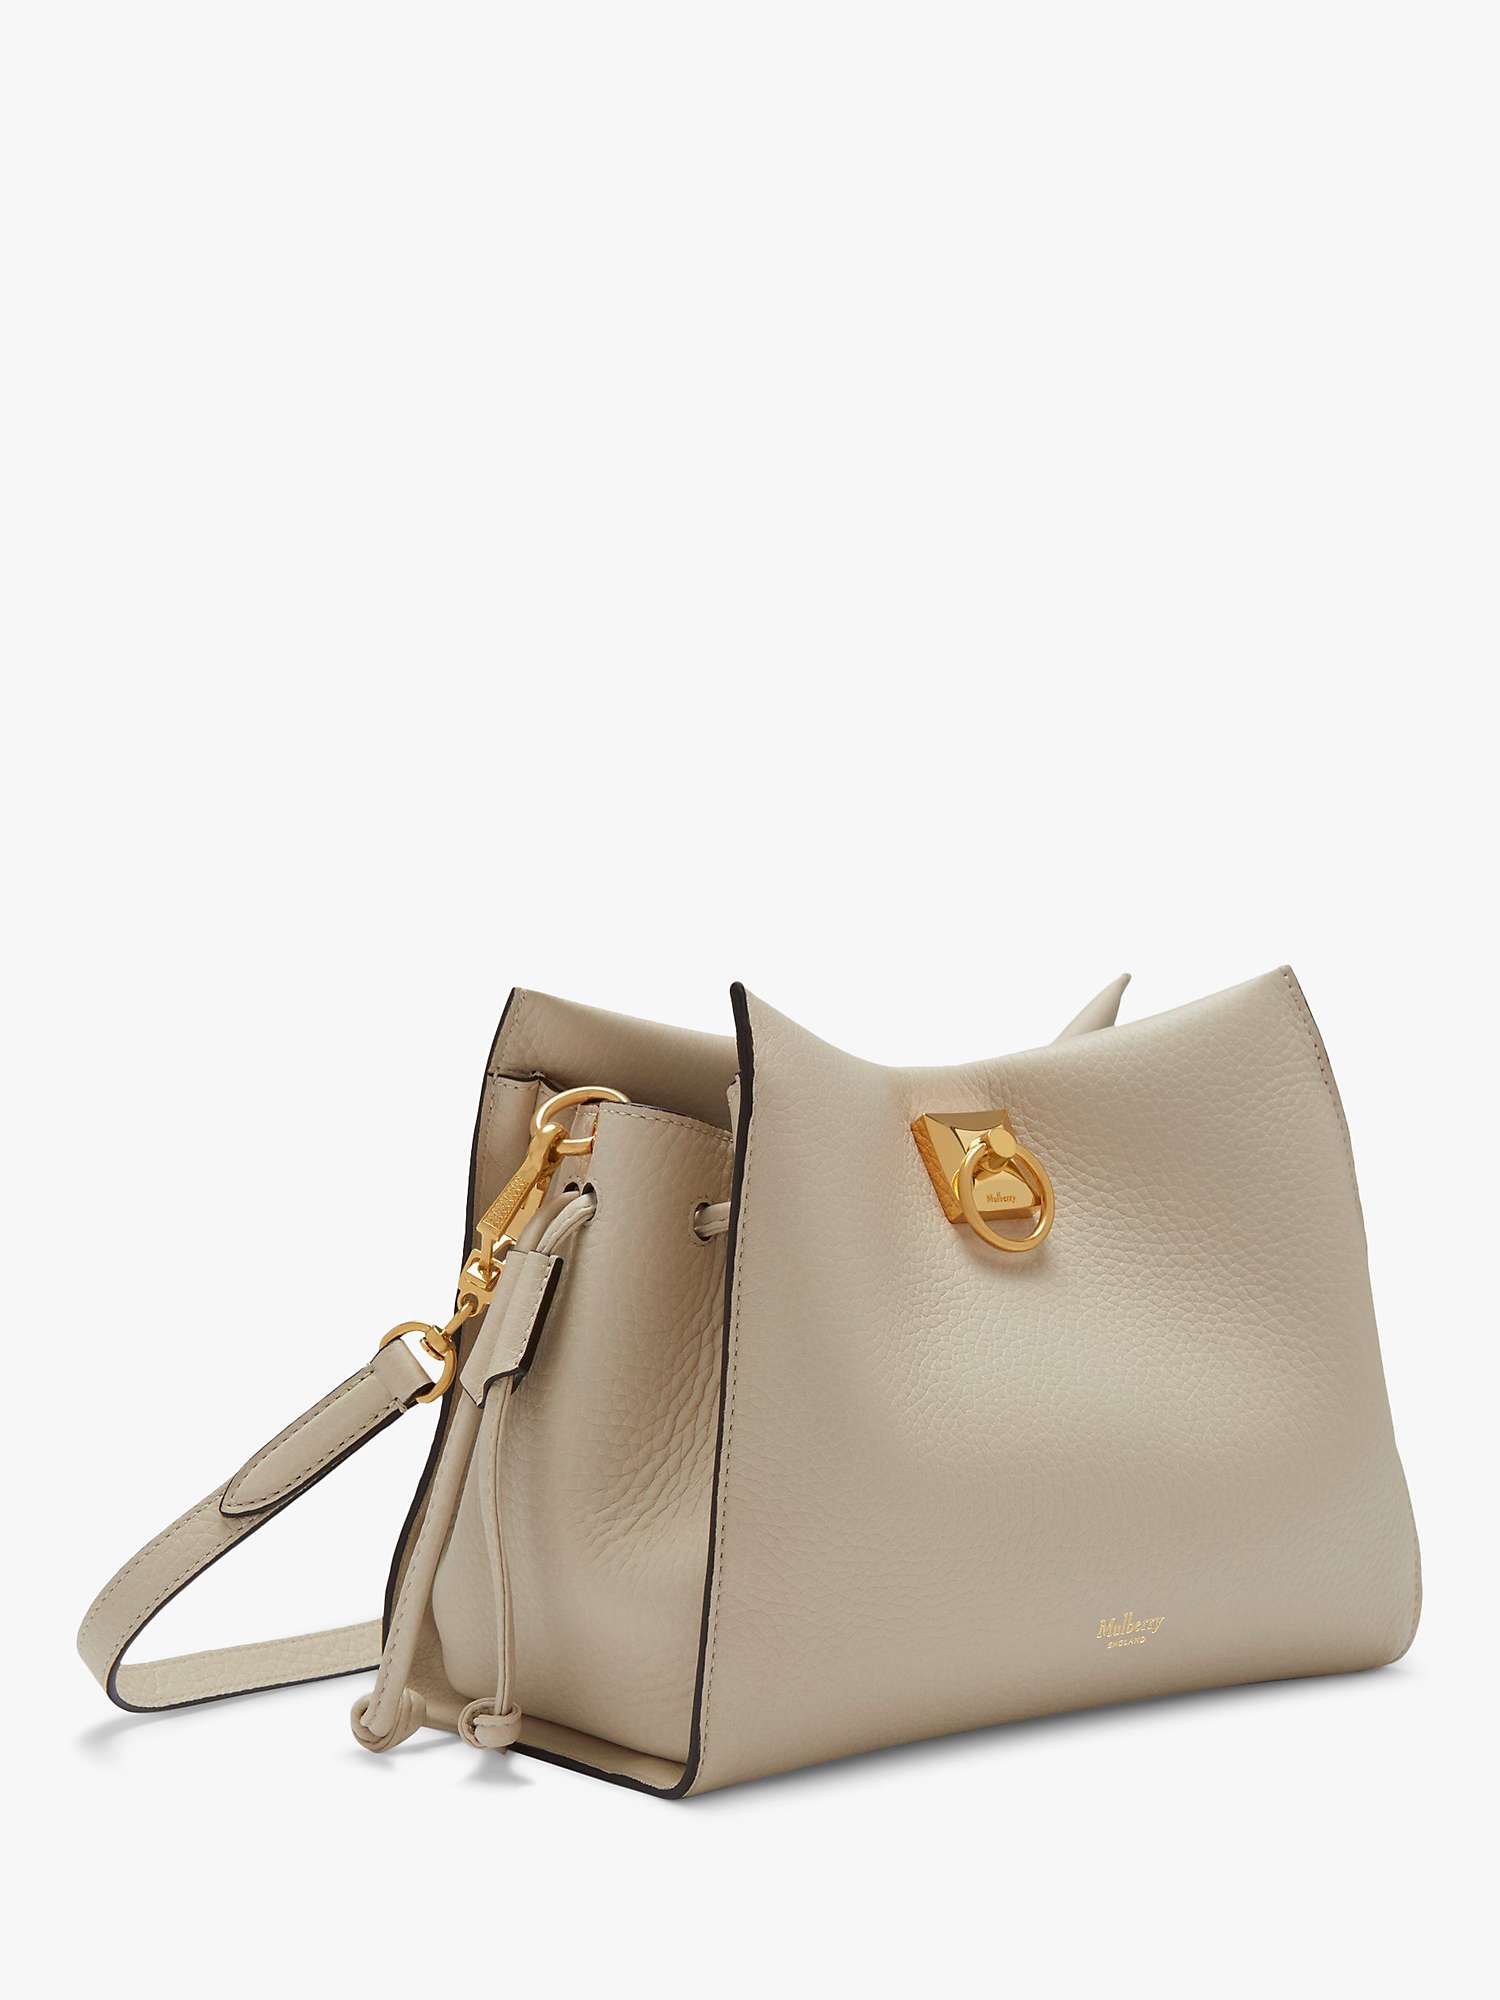 Buy Mulberry Small Iris Heavy Grain & Silky Calf's Leather Shoulder Bag Online at johnlewis.com